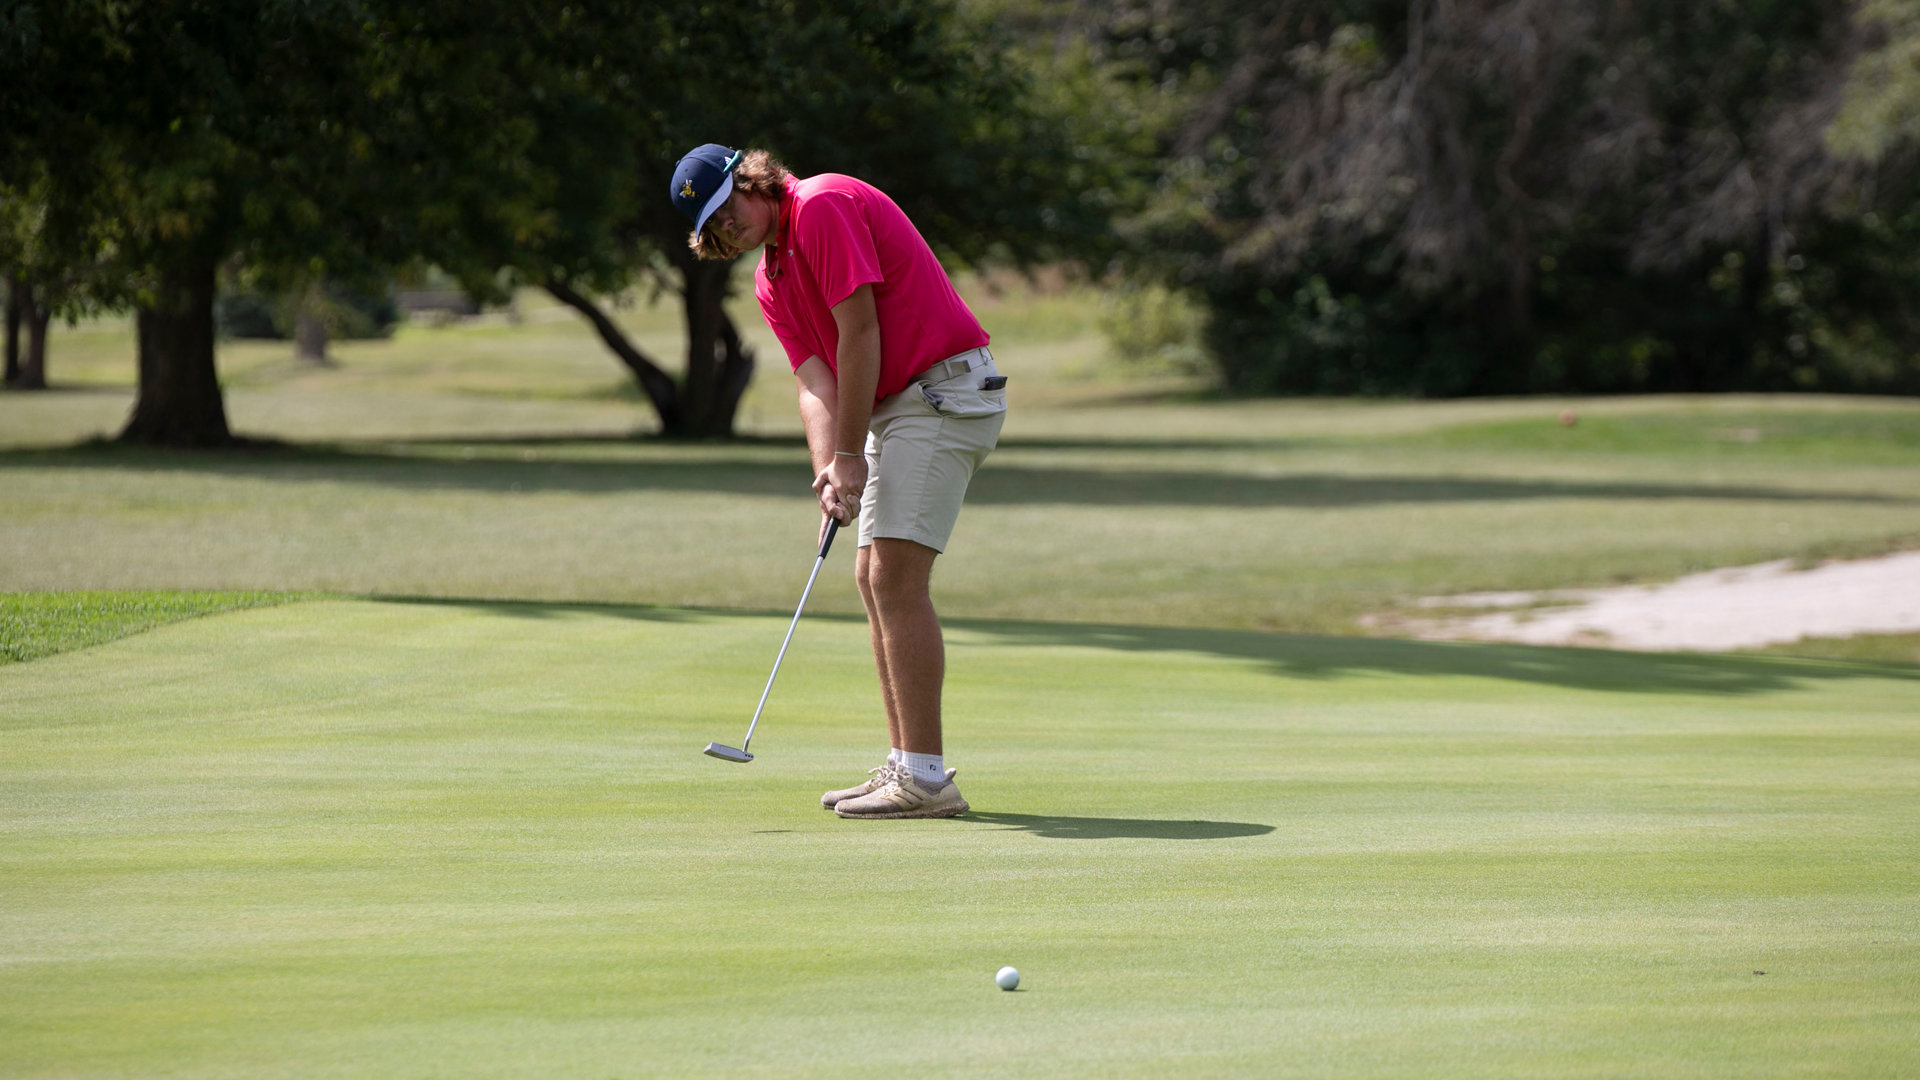 Men’s Golf Competed in the Spring Statesmen Invitational